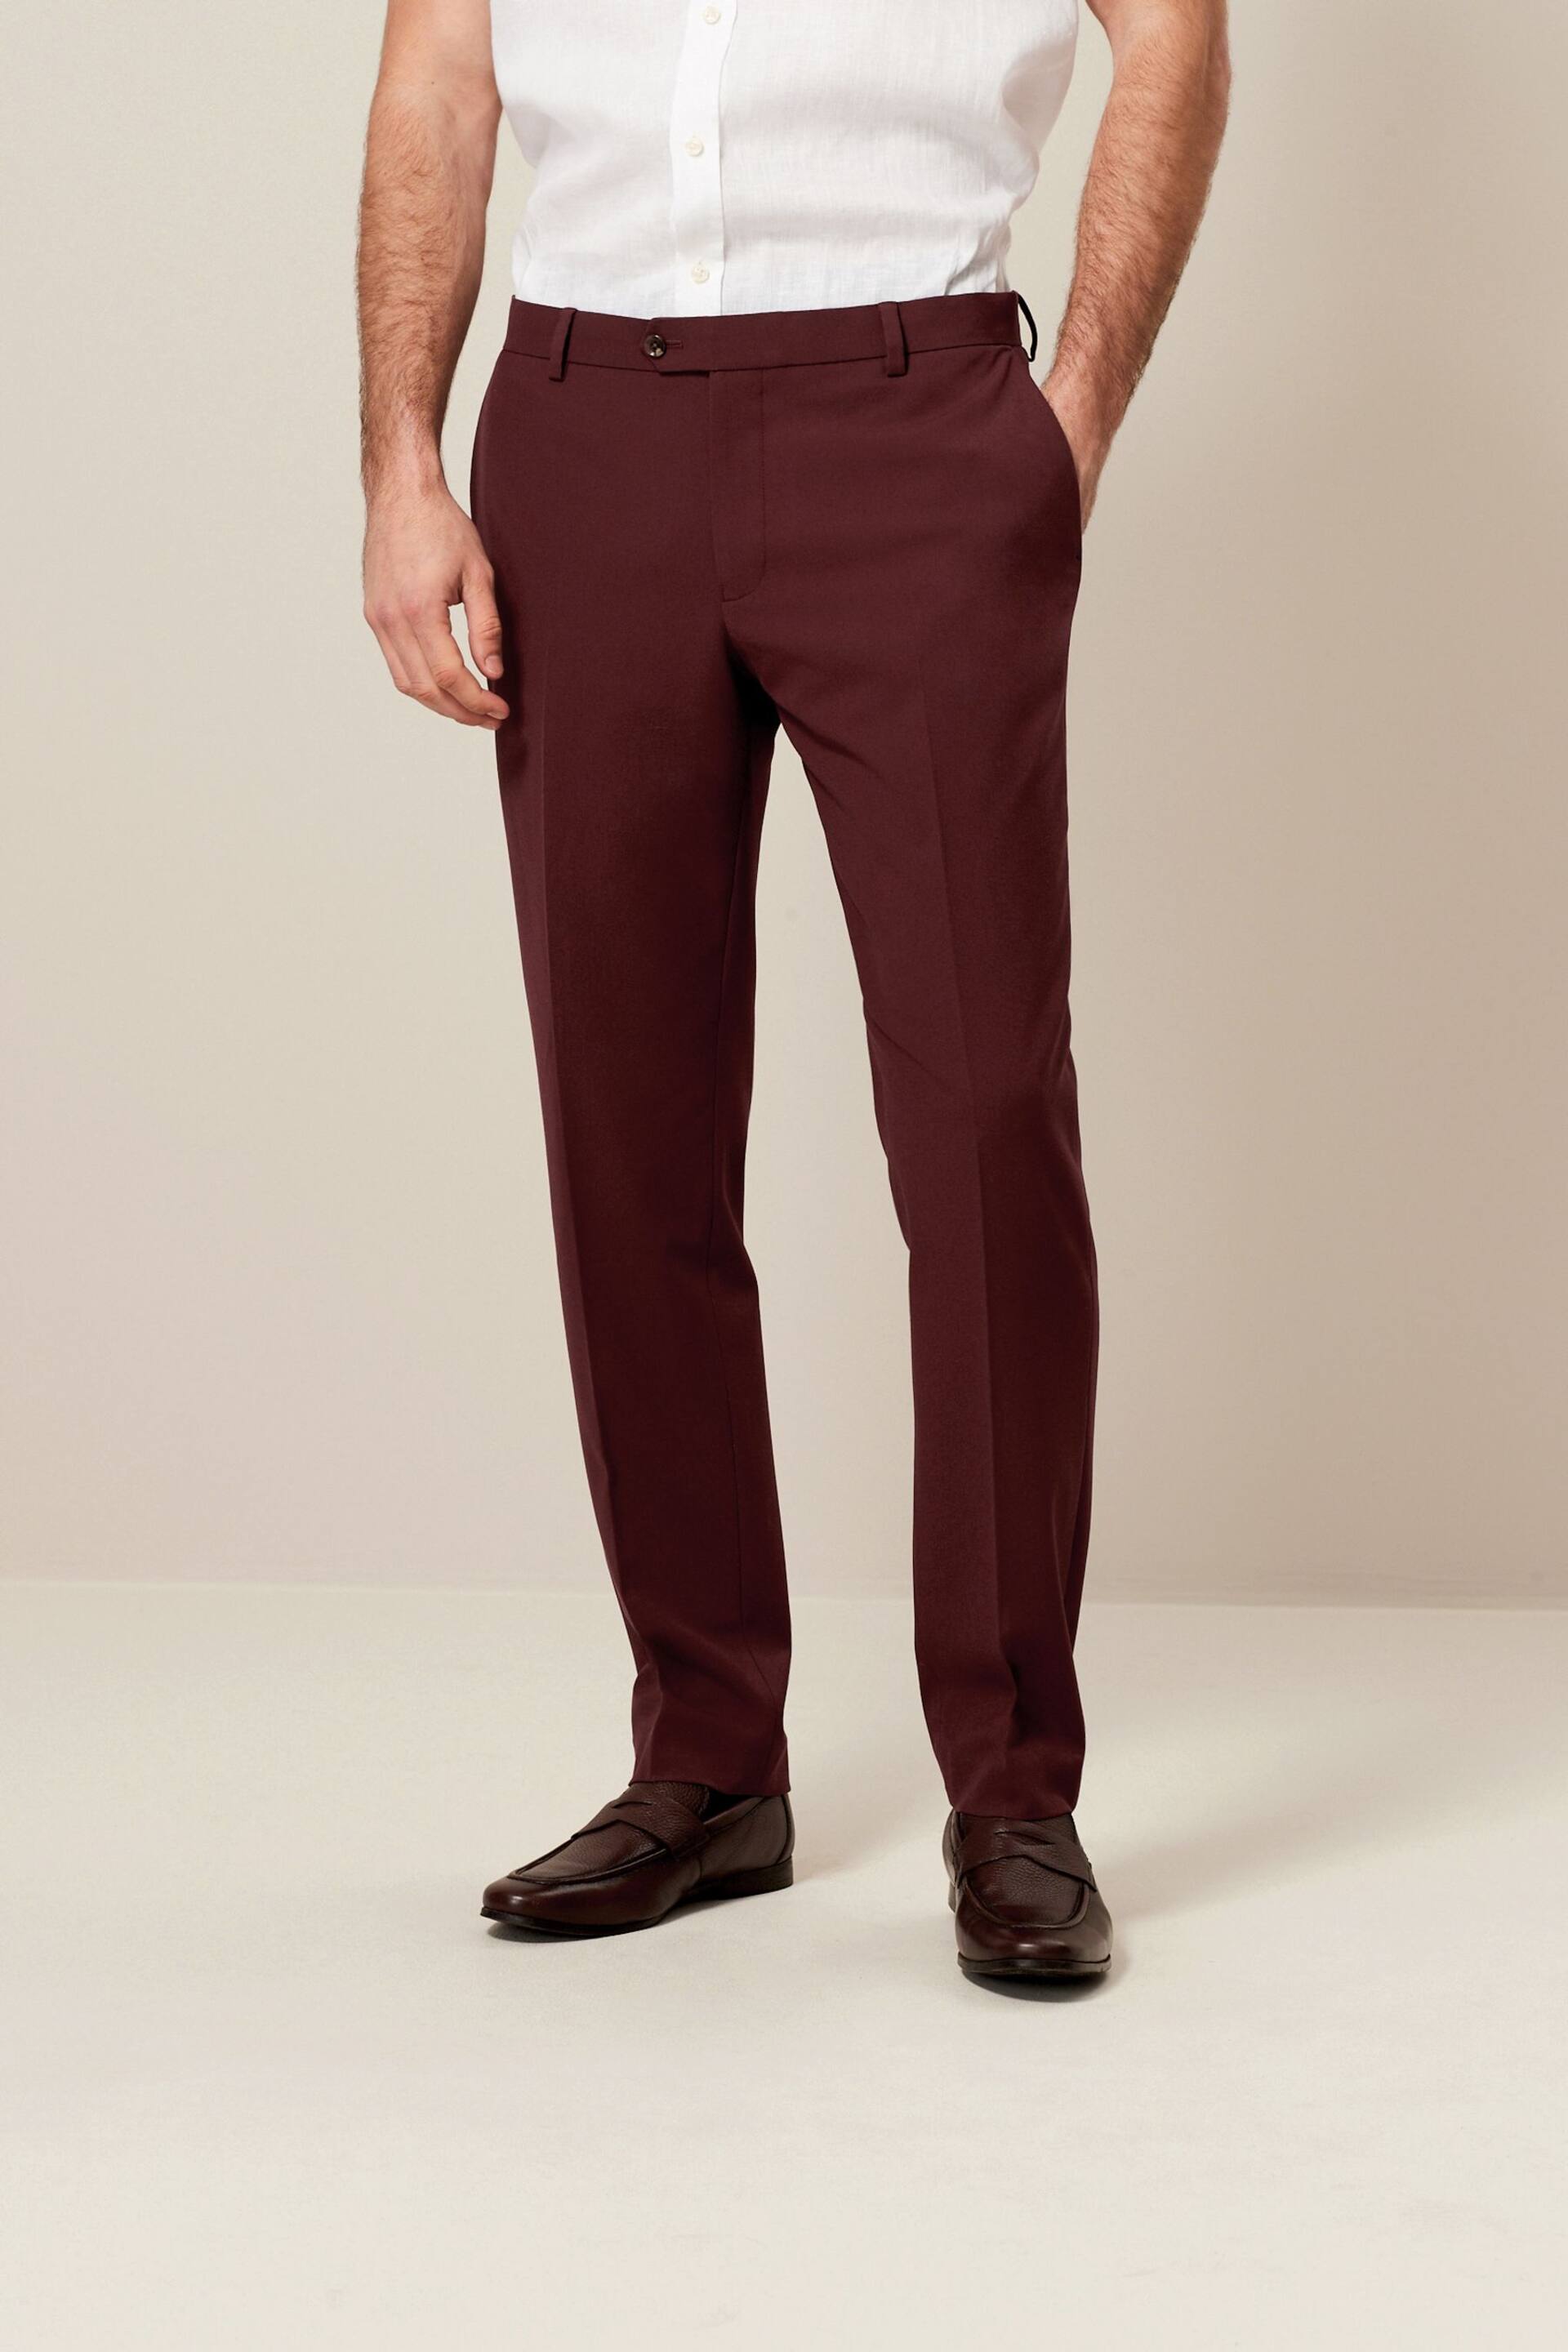 Brick Red Regular Fit Motionflex Stretch Suit: Trousers - Image 1 of 8